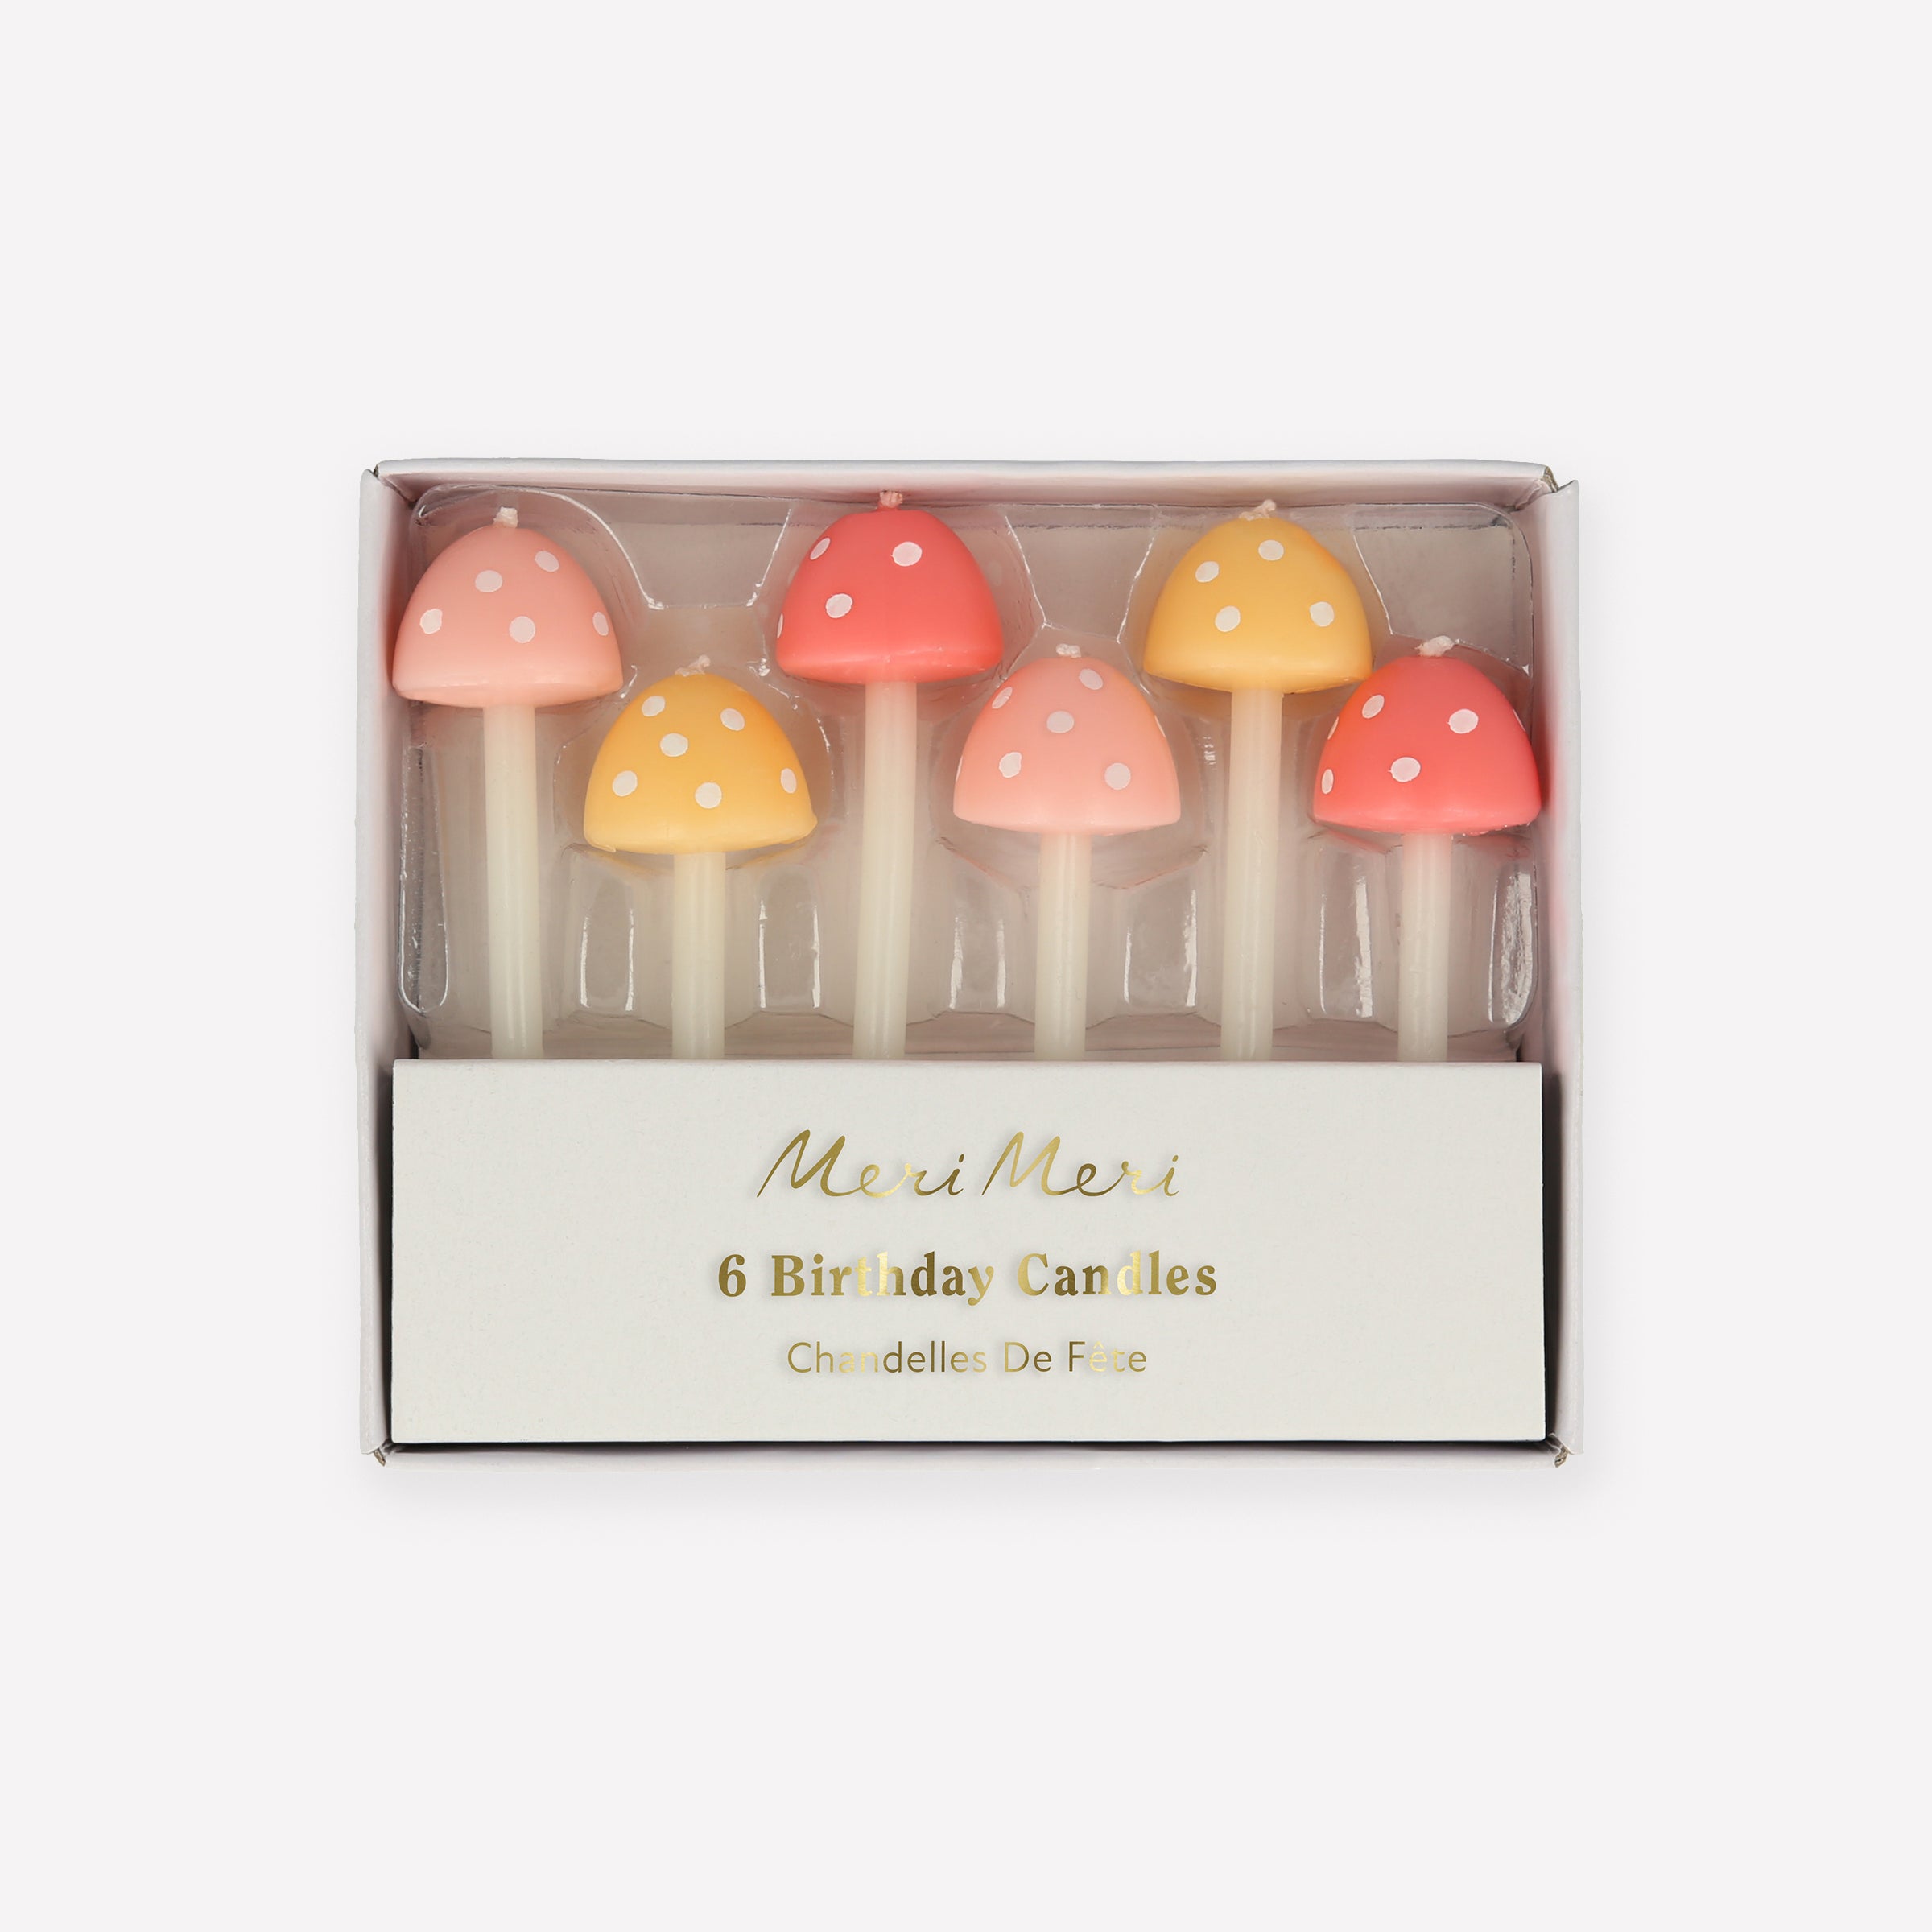 Our mushroom birthday candles are perfect for a fairy birthday party, outdoor birthday party or fall birthday party.